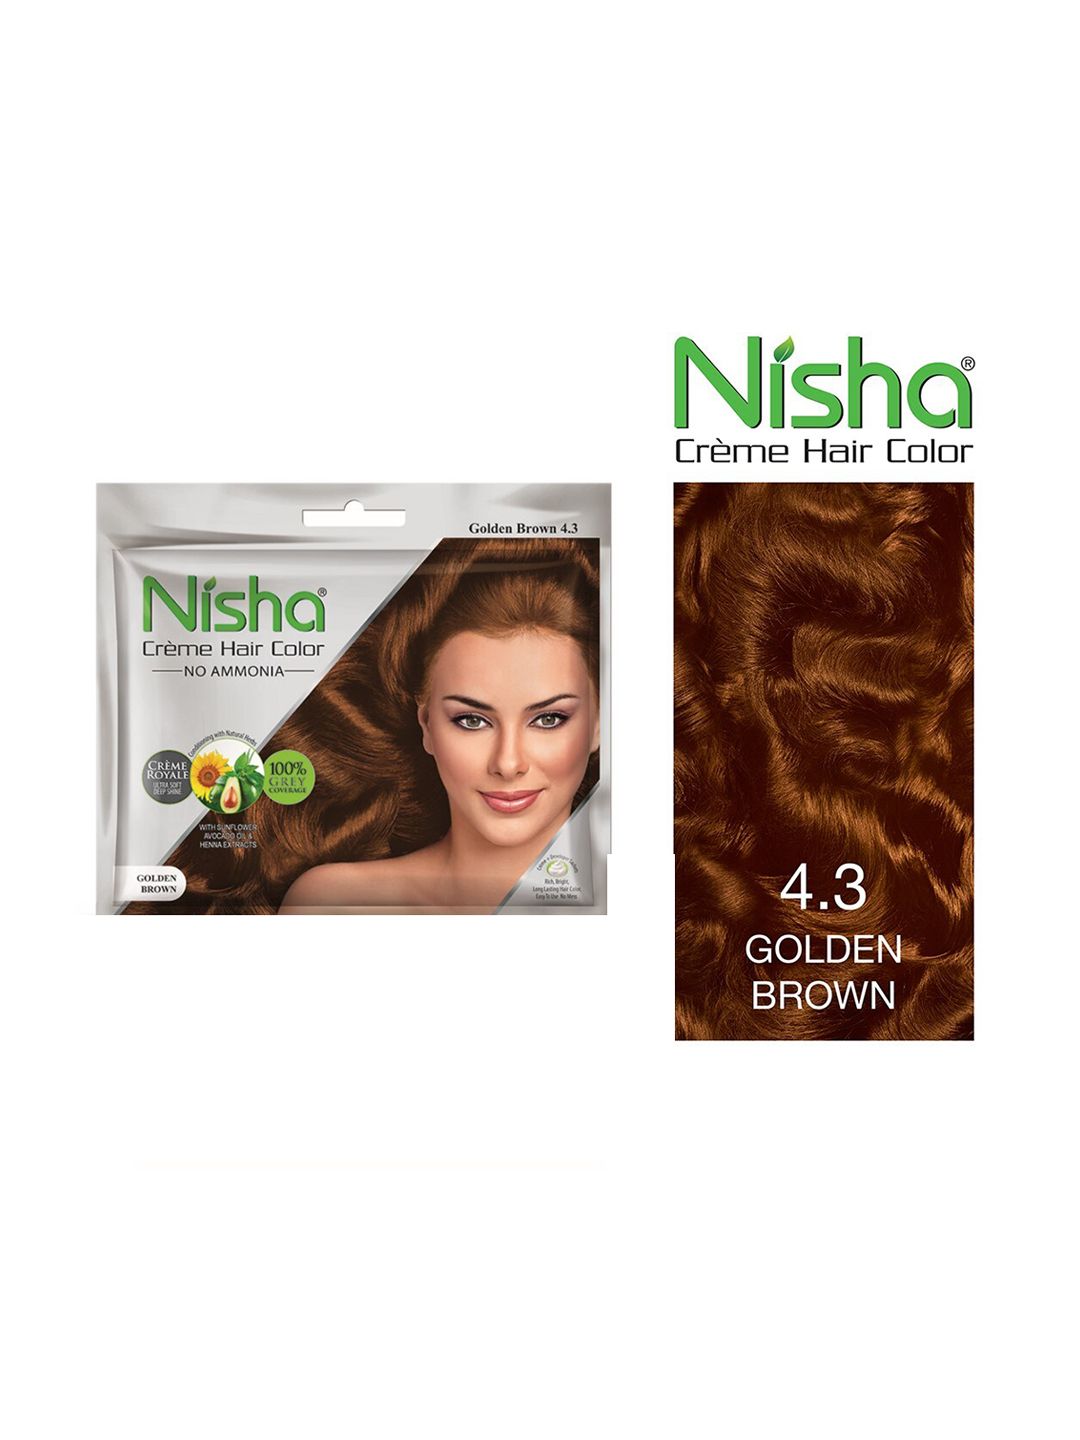 Nisha Set of 6 Creme Hair Colour 240g - Golden Brown Price in India